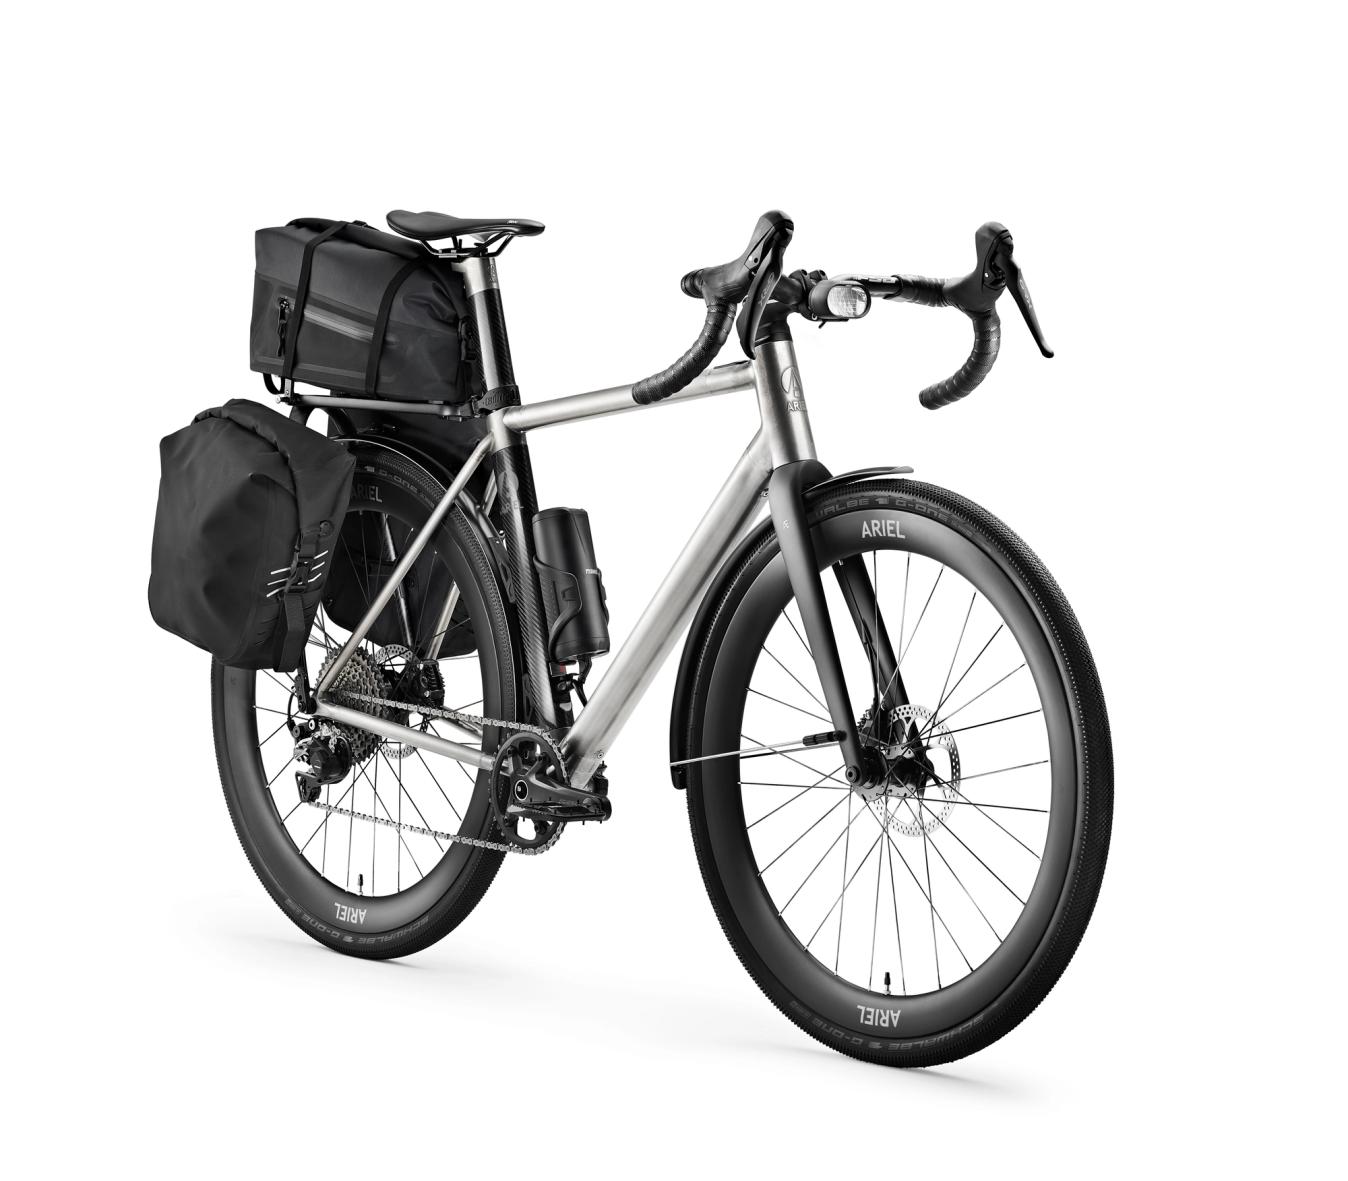 The Dash Adventure can be configured with a Tailfin rear rack ideal for bikepacking 